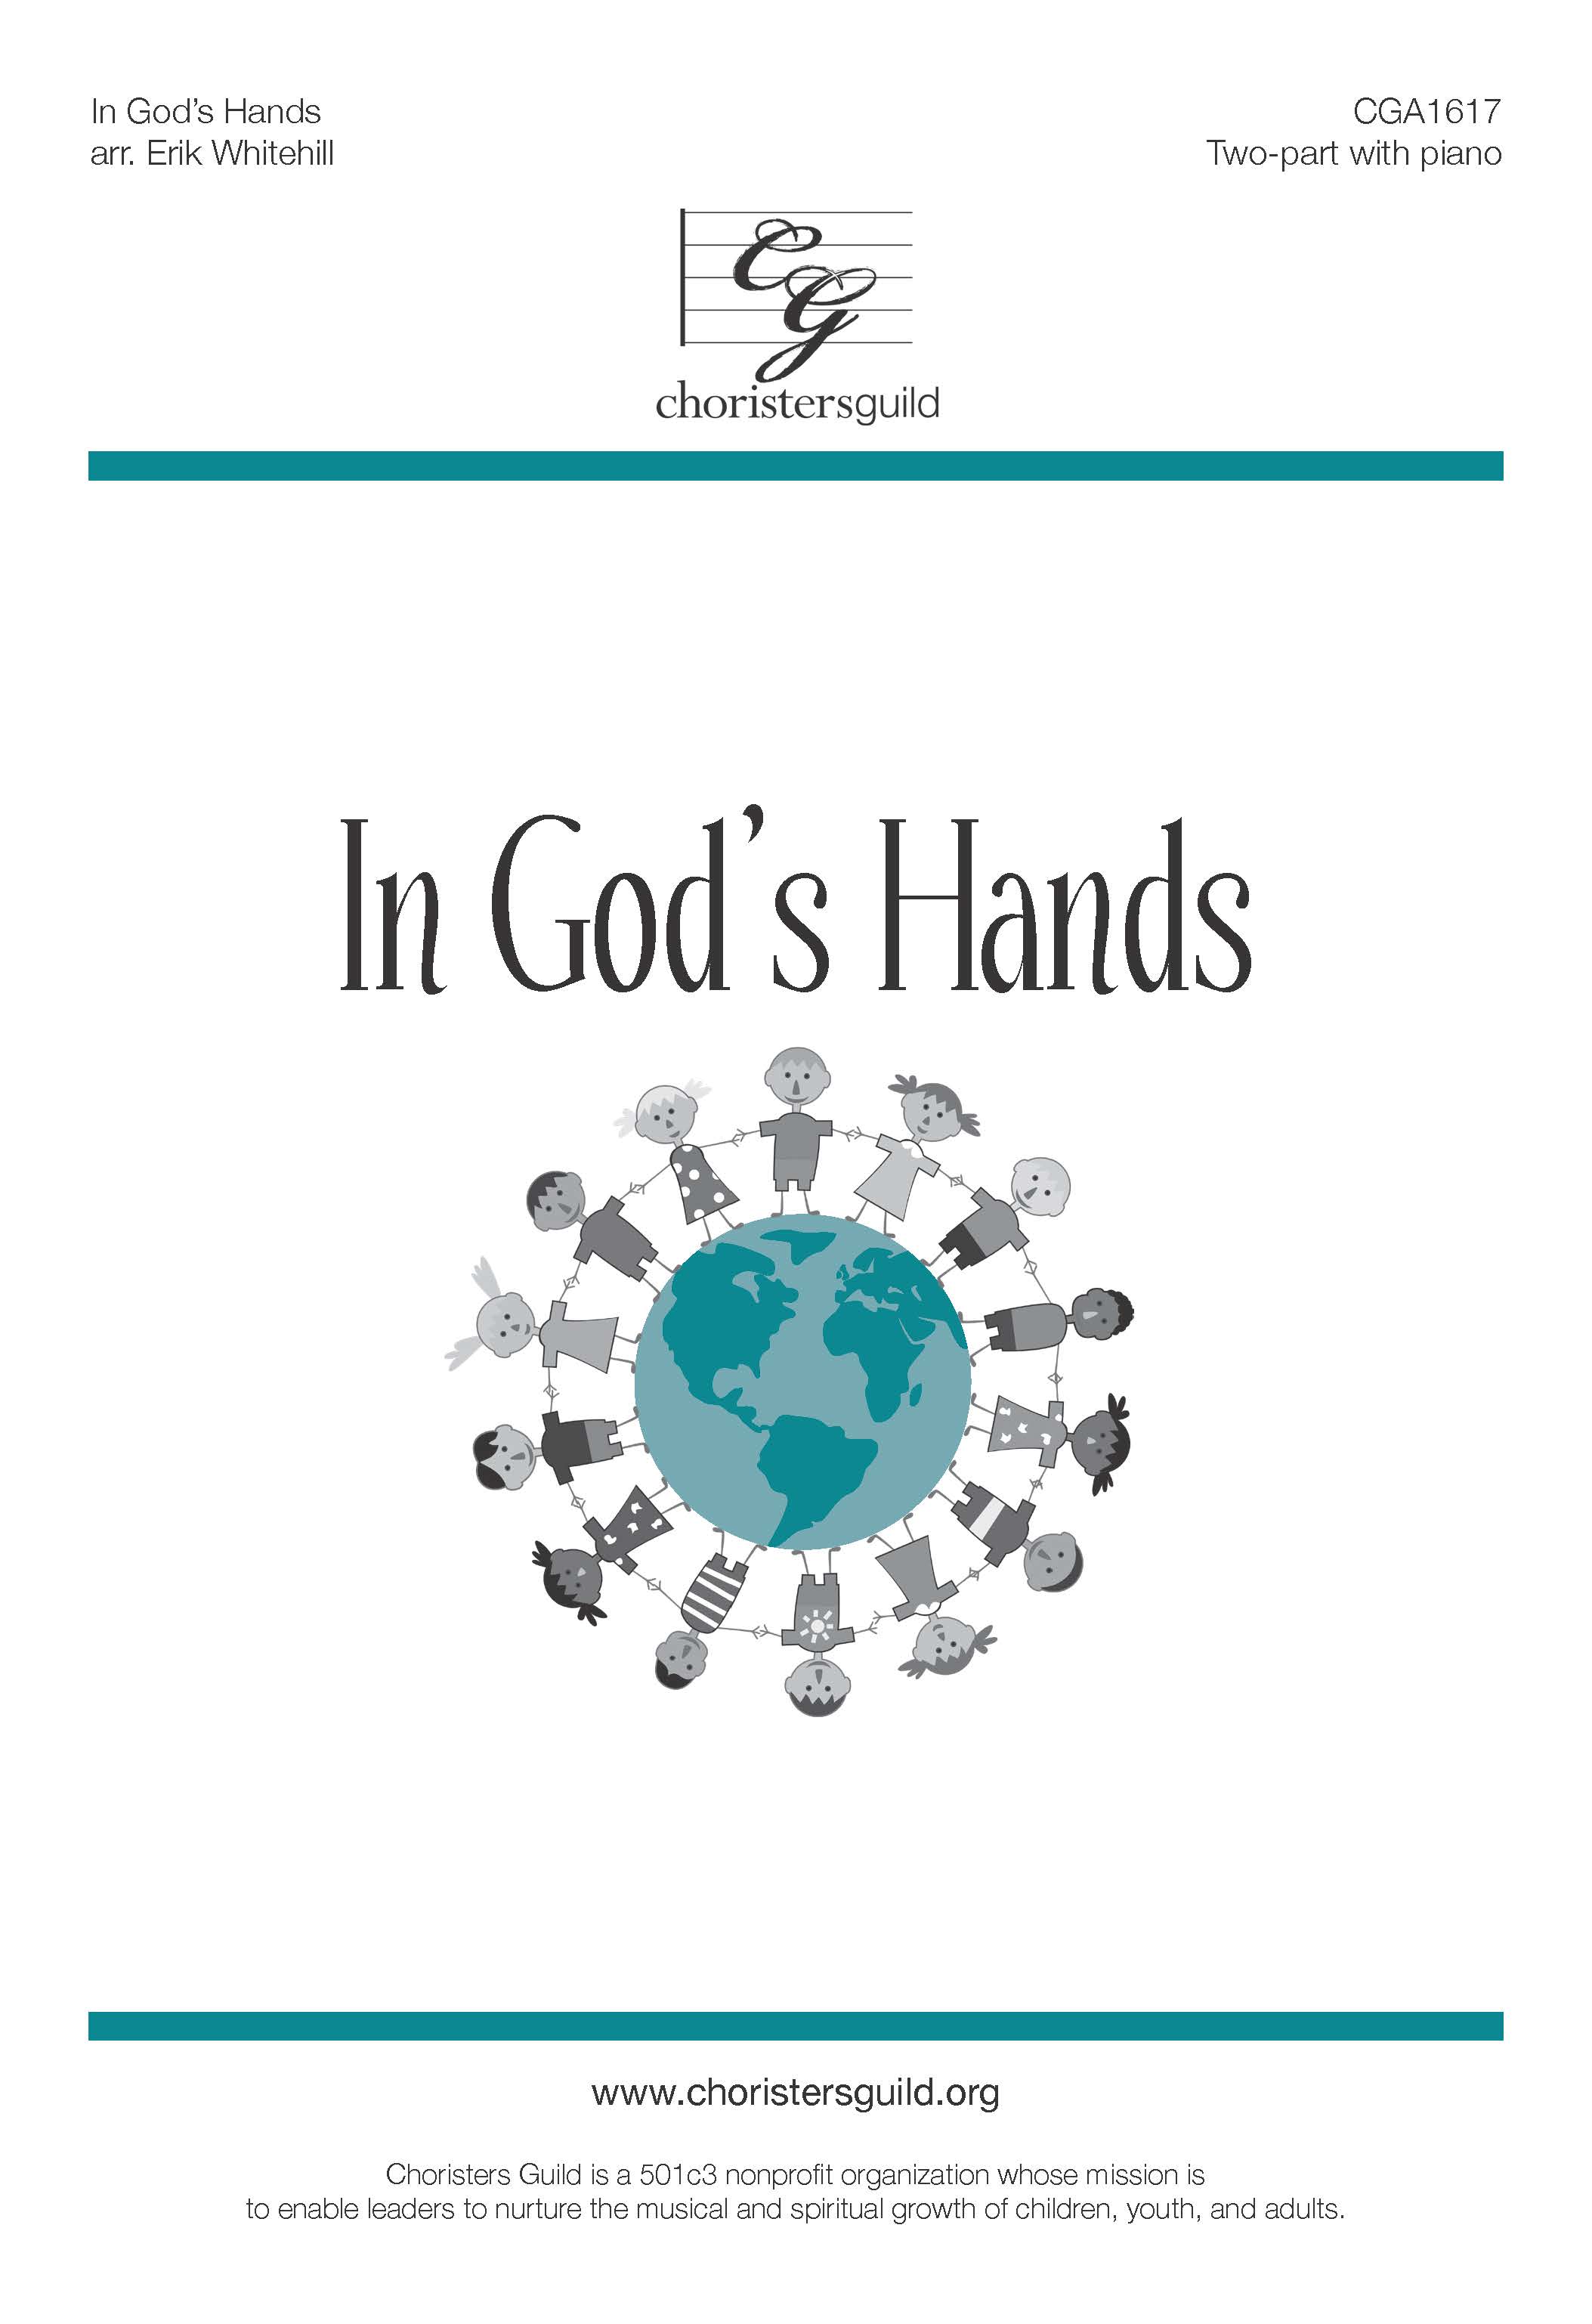 In God's Hands - Two-part